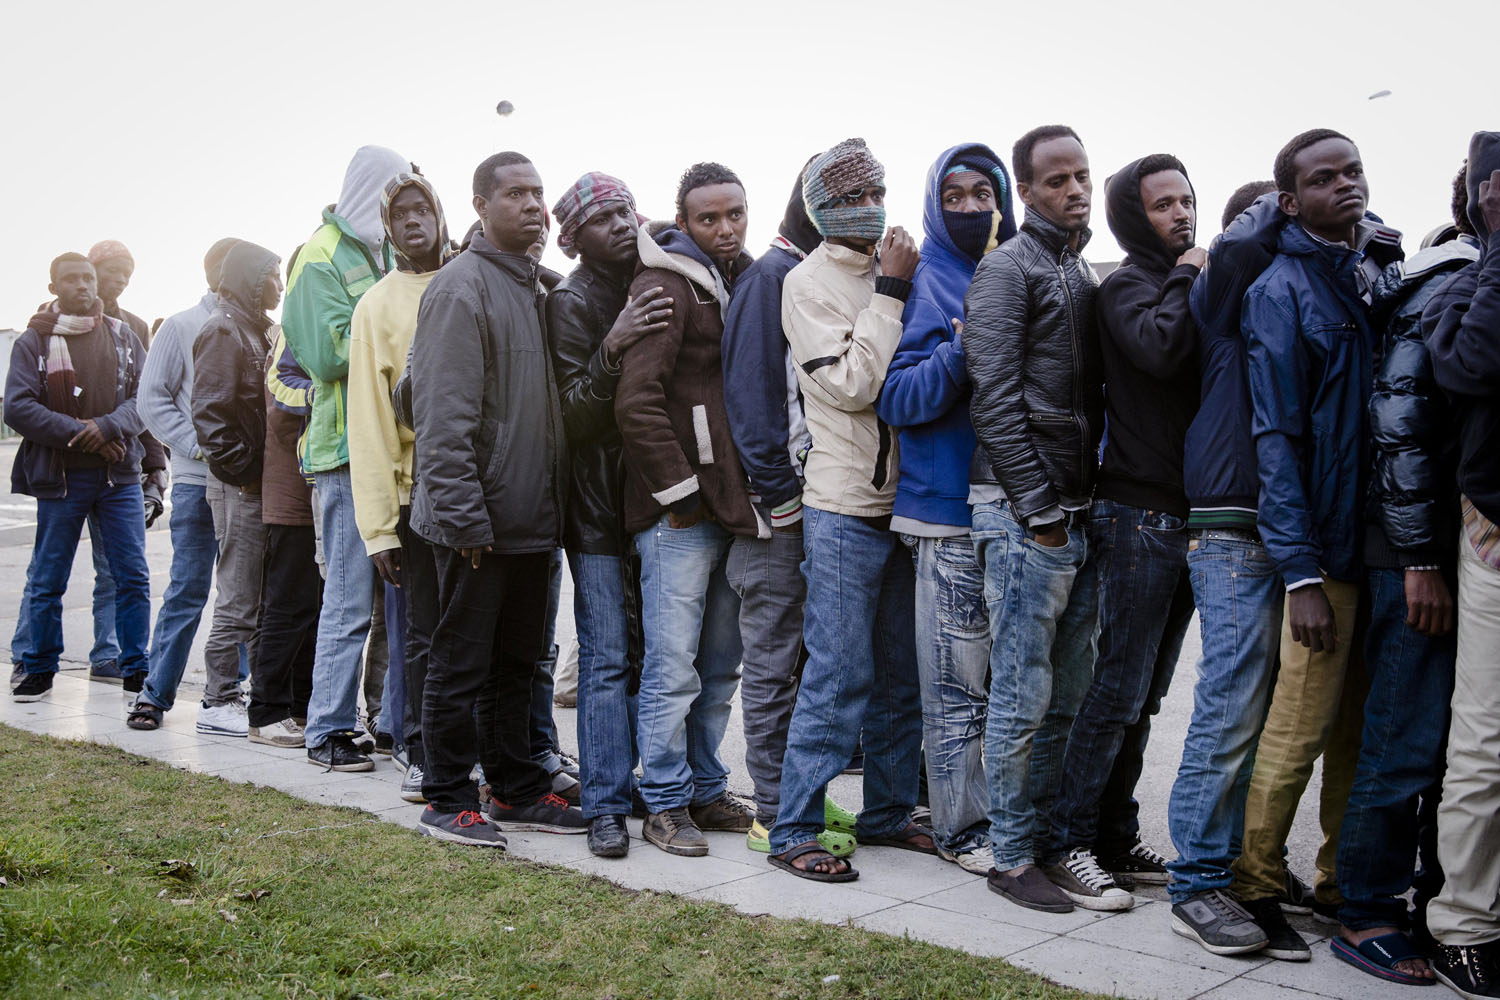 Migrants wait in line for clothes distribution in Calais, France, Oct. 8, 2014.  Resentment and fear have swept the city in the last year, along with a new wave of migrants hoping to cross illegally into Britain, which they see as a better place than France to start a new life.